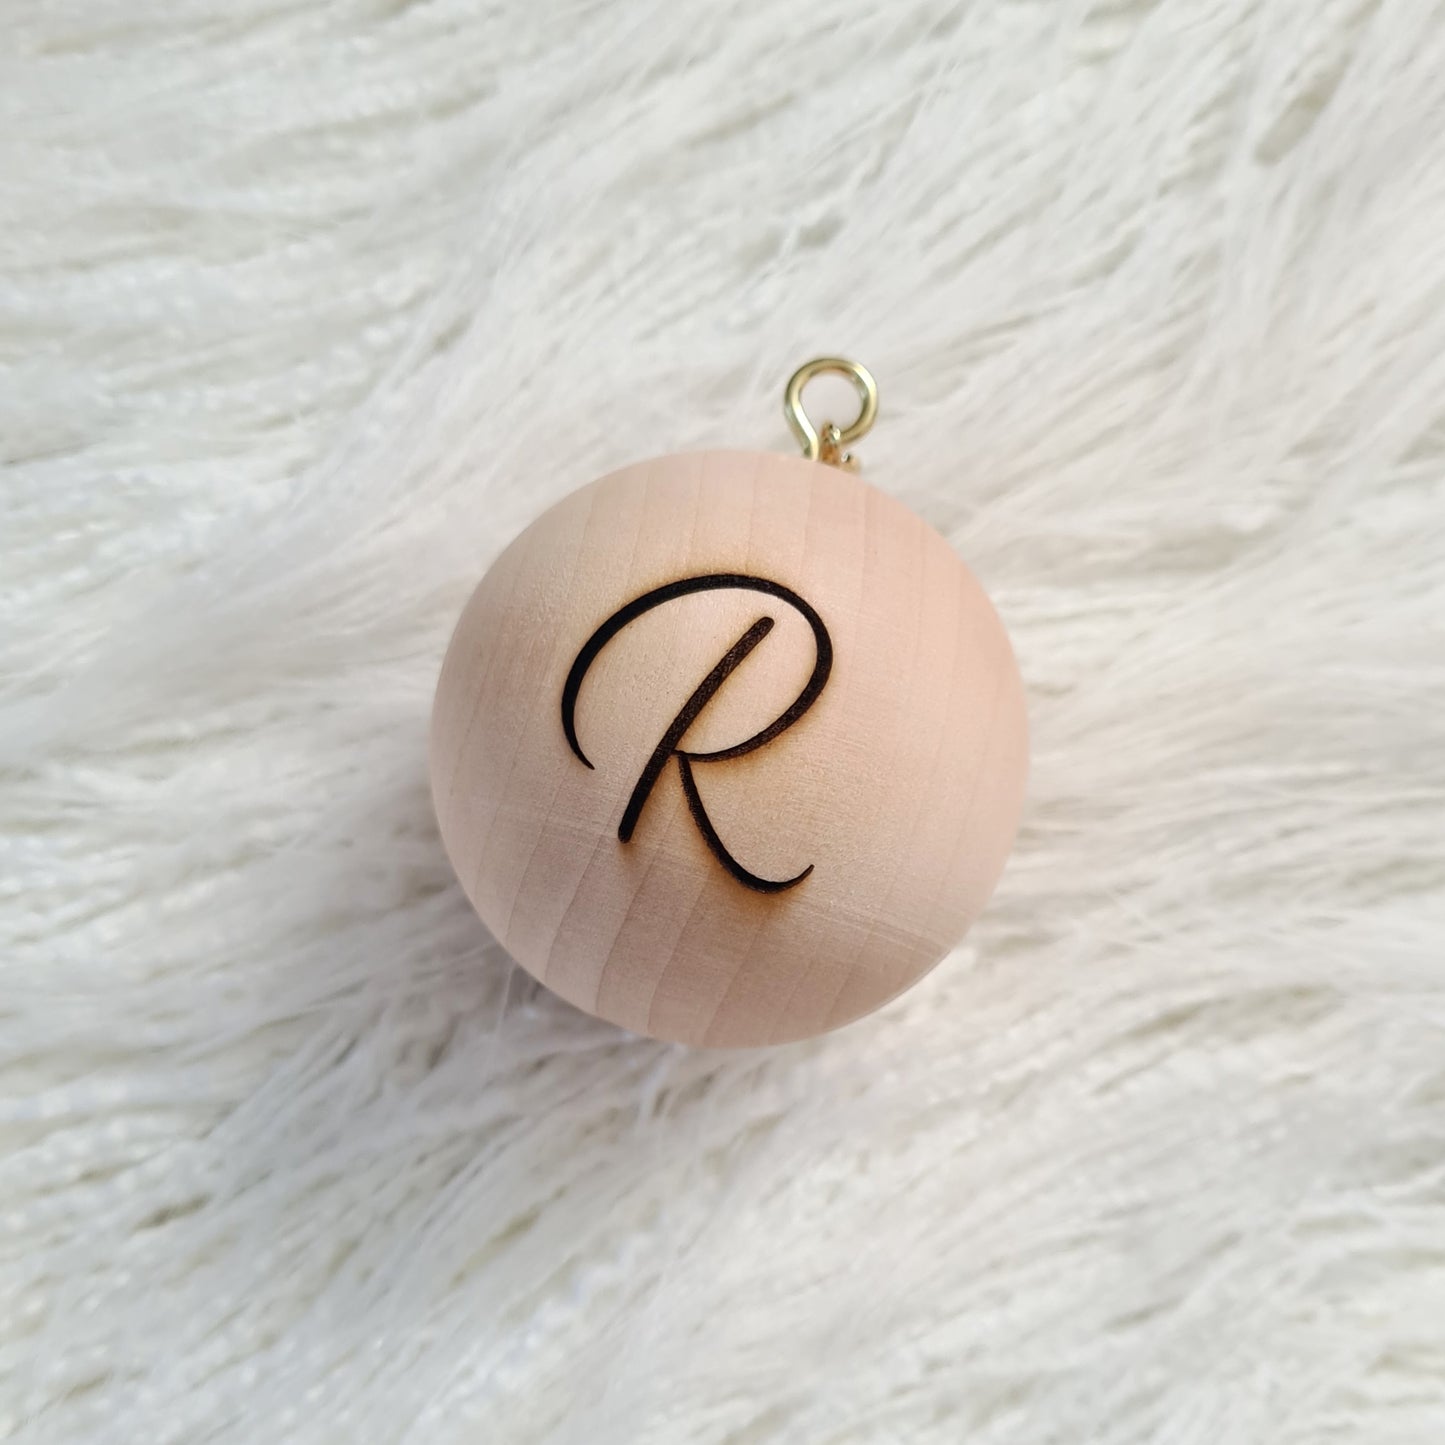 MINI WOODEN (6cm) Initial Handcrafted Bauble